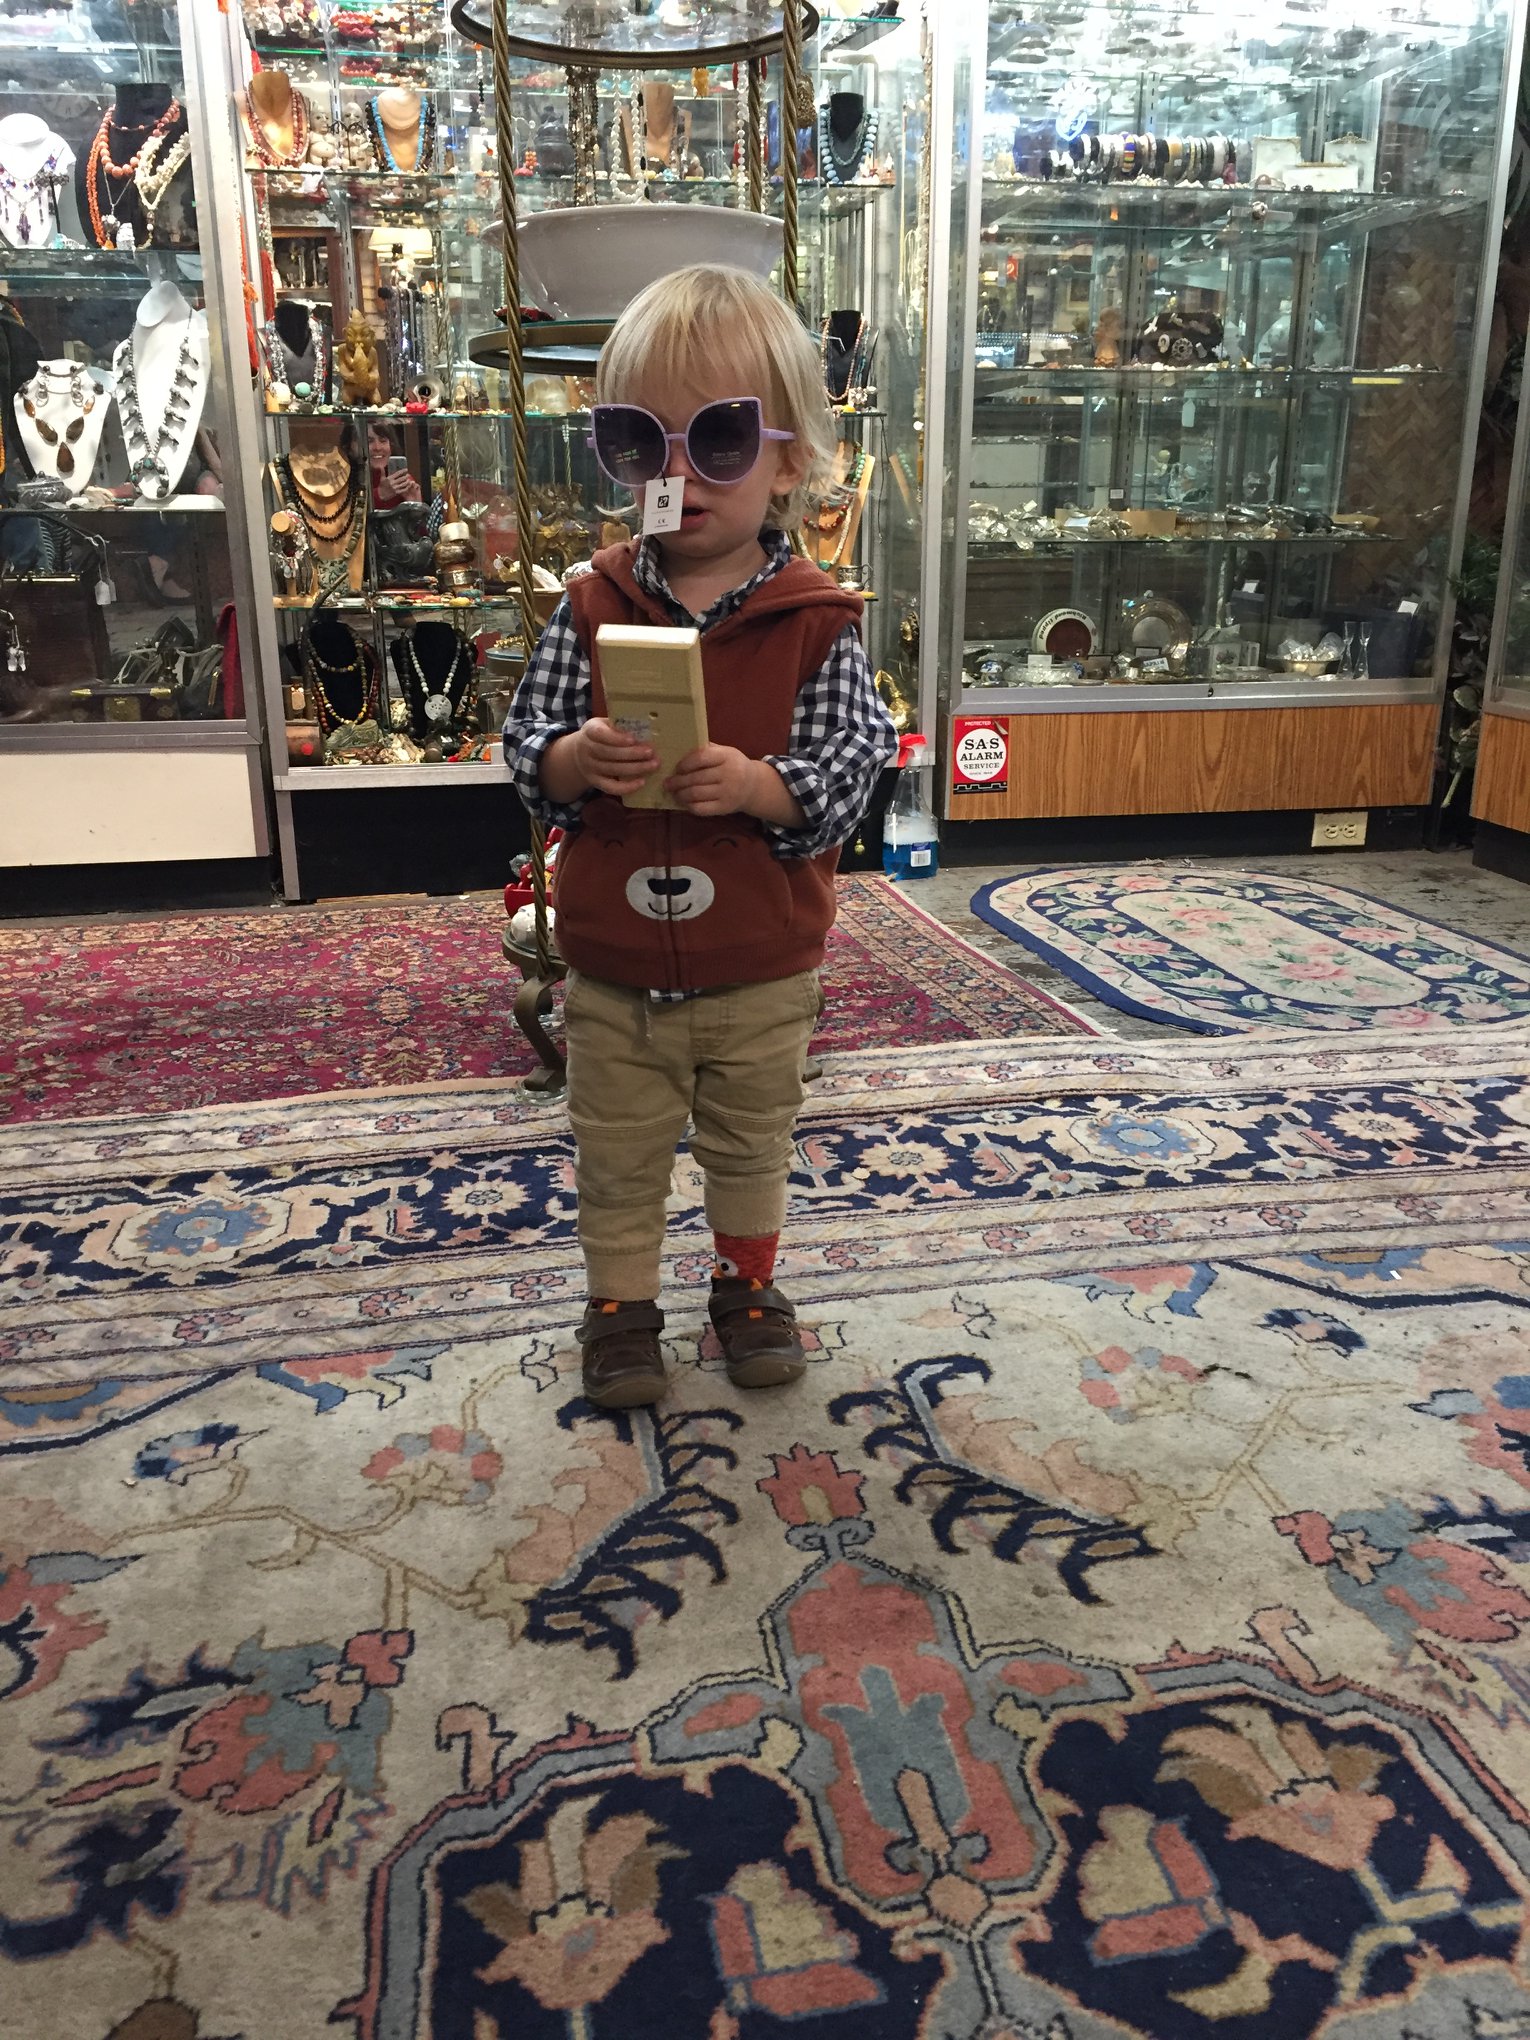 Young child wearing sunglasses and holding item found in store